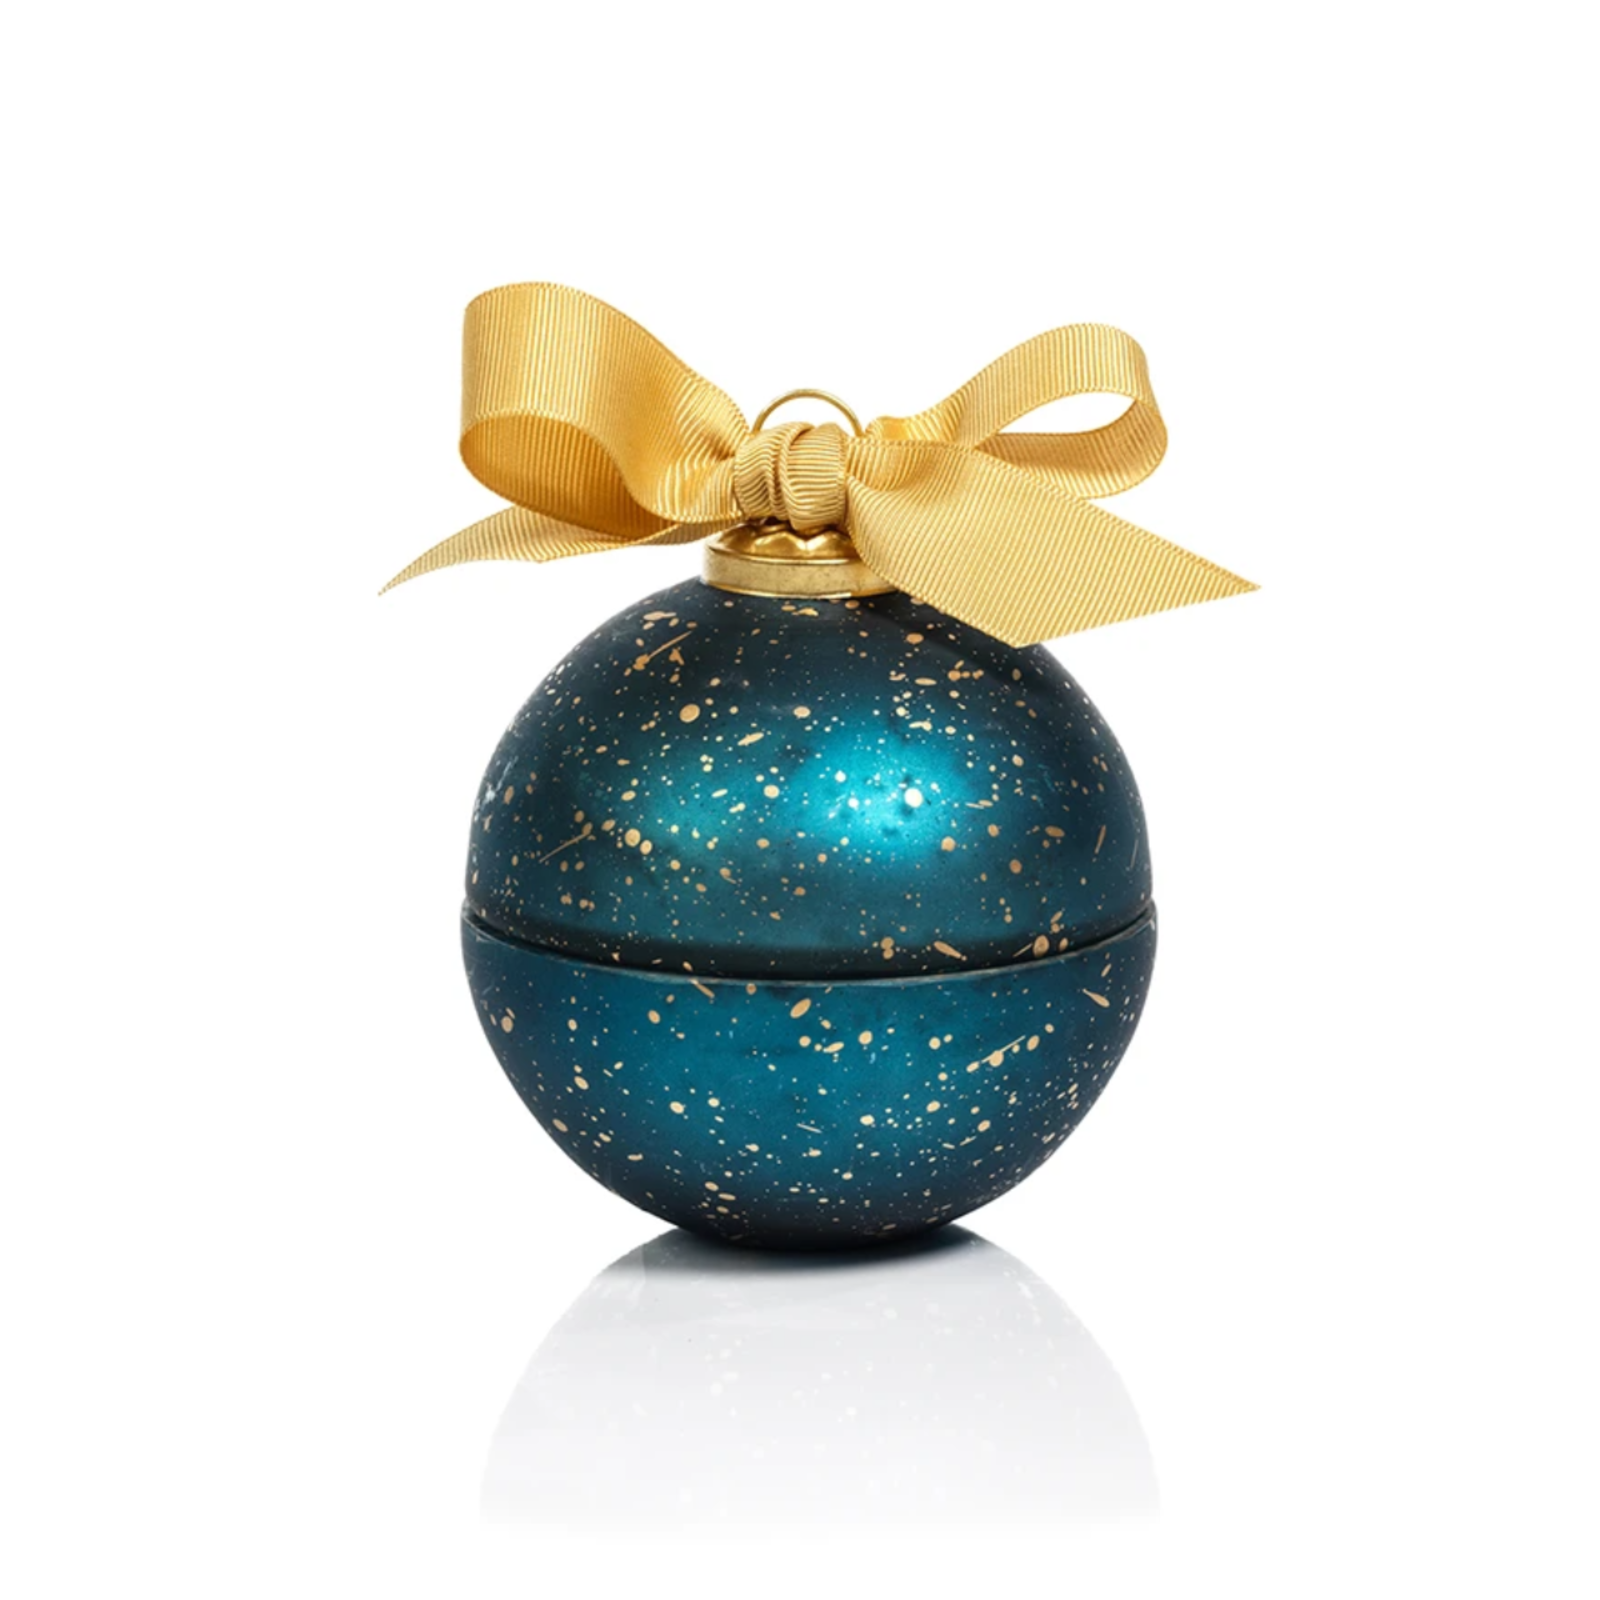 Zodax Scented Candle Ornament Blue   IG-2605 loading=